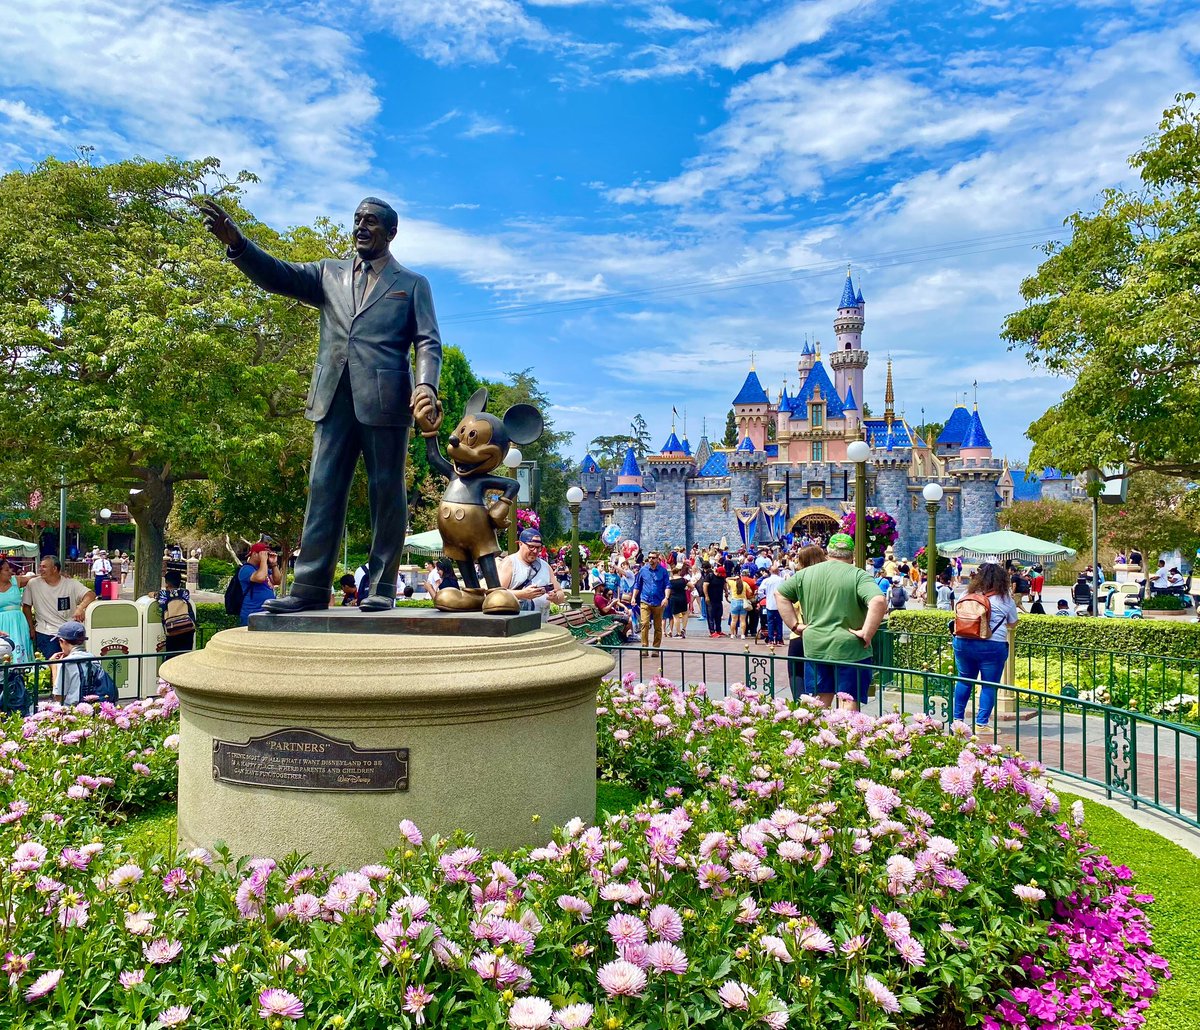 Welcome to Disneyland, California, USA. thedngr.com for art photography tshirts buttons magnets mirrors + ebay collectibles @ ebay.com/usr/thedngr #disney #disneyworld #disneyland #architecture #disneyphotography #disneytwitter #themepark #castle #mickeymouse